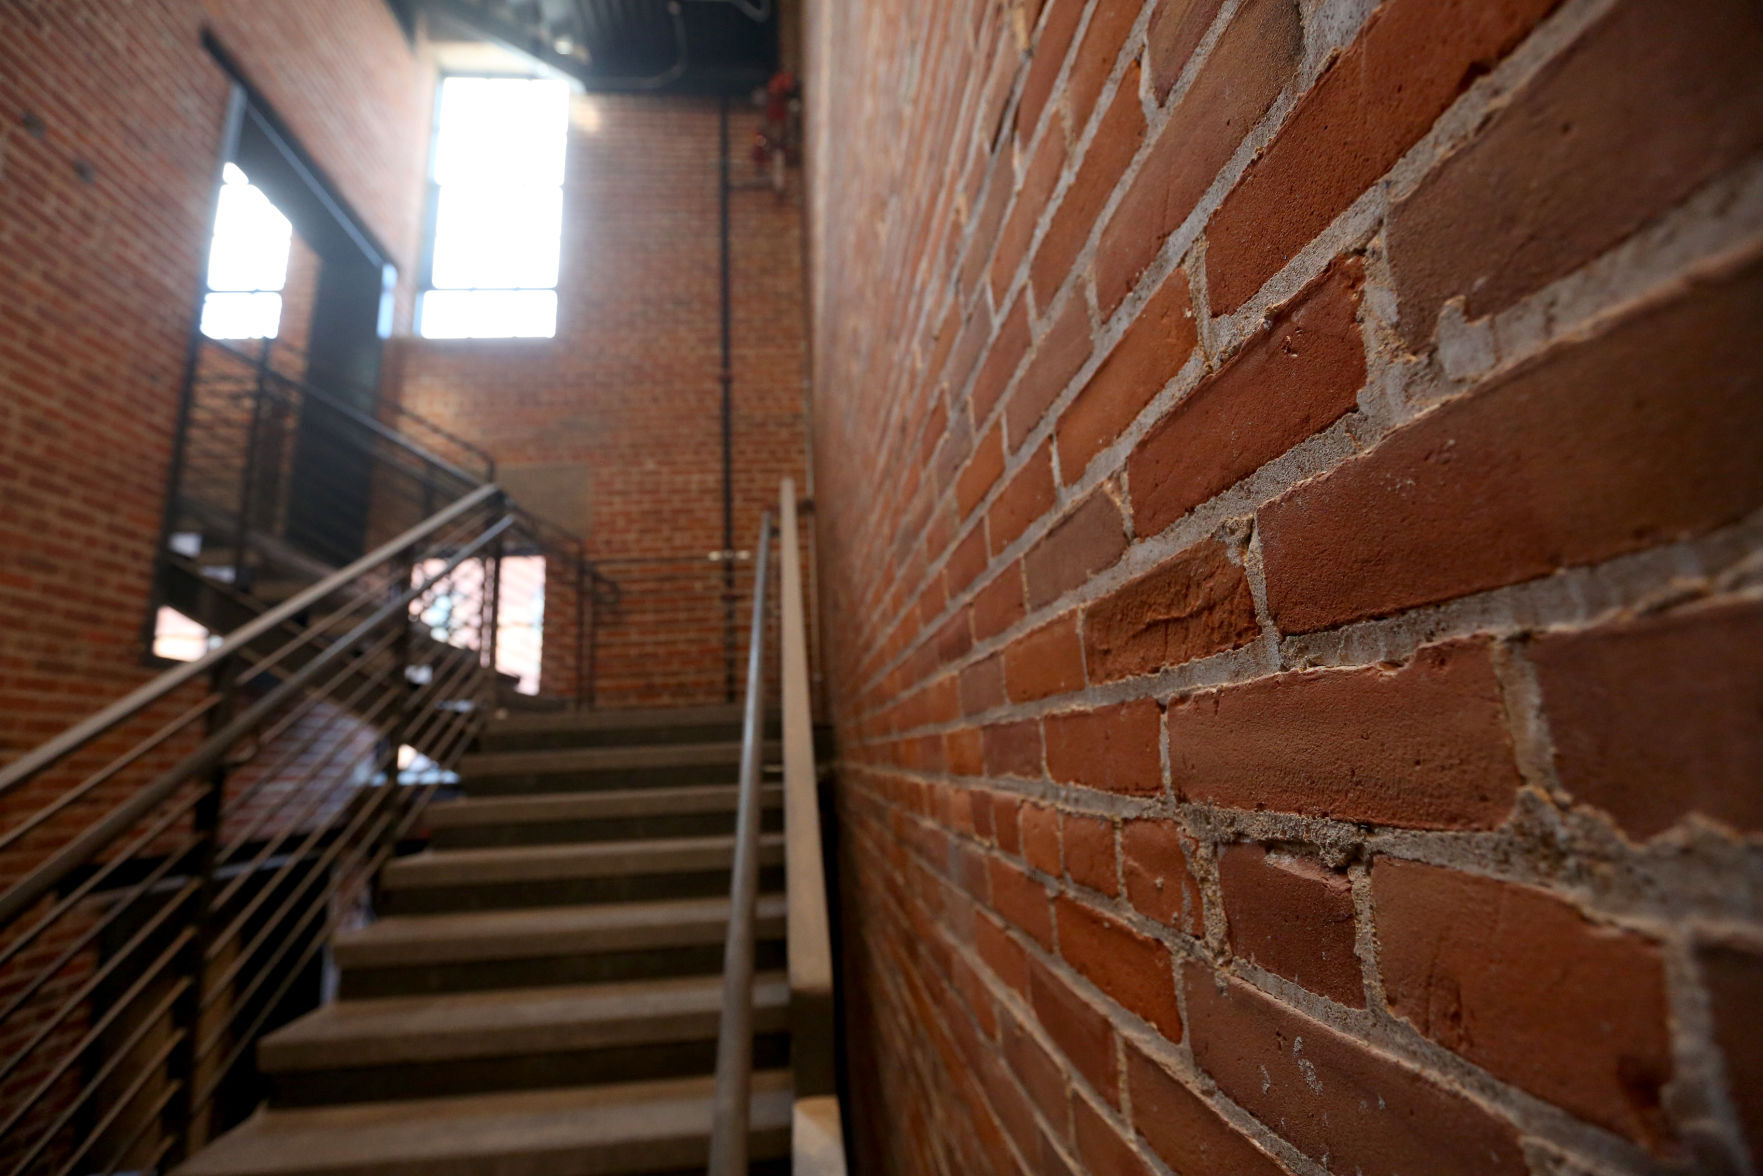 A stairwell at the Dupaco Voices Building in Dubuque on Wednesday, Nov. 4, 2020. PHOTO CREDIT: JESSICA REILLY